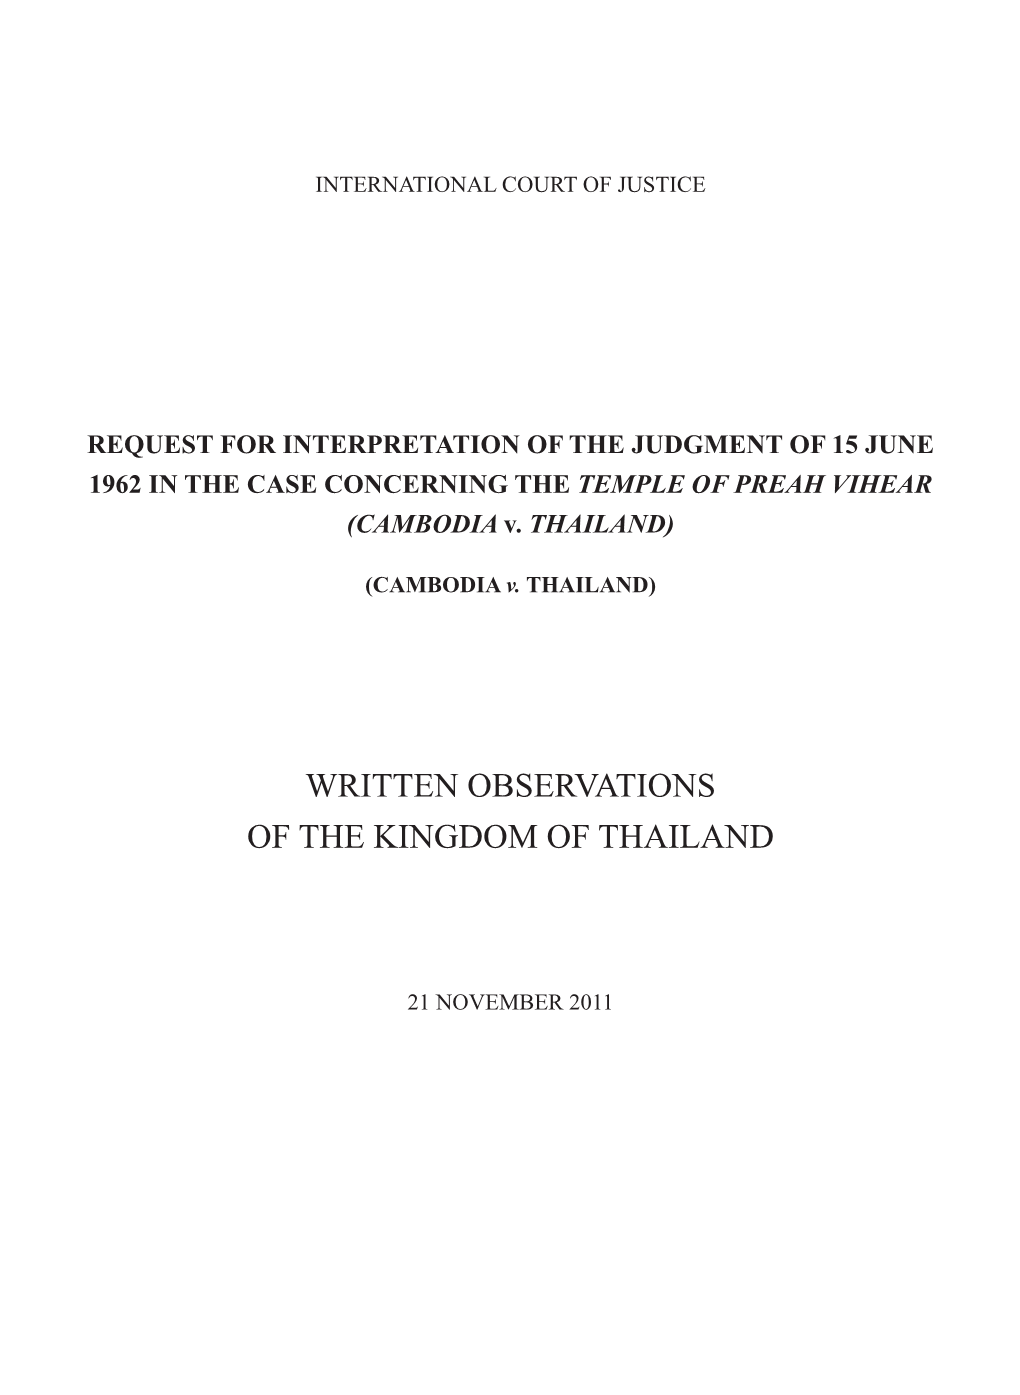 Written Observations of the Kingdom of Thailand